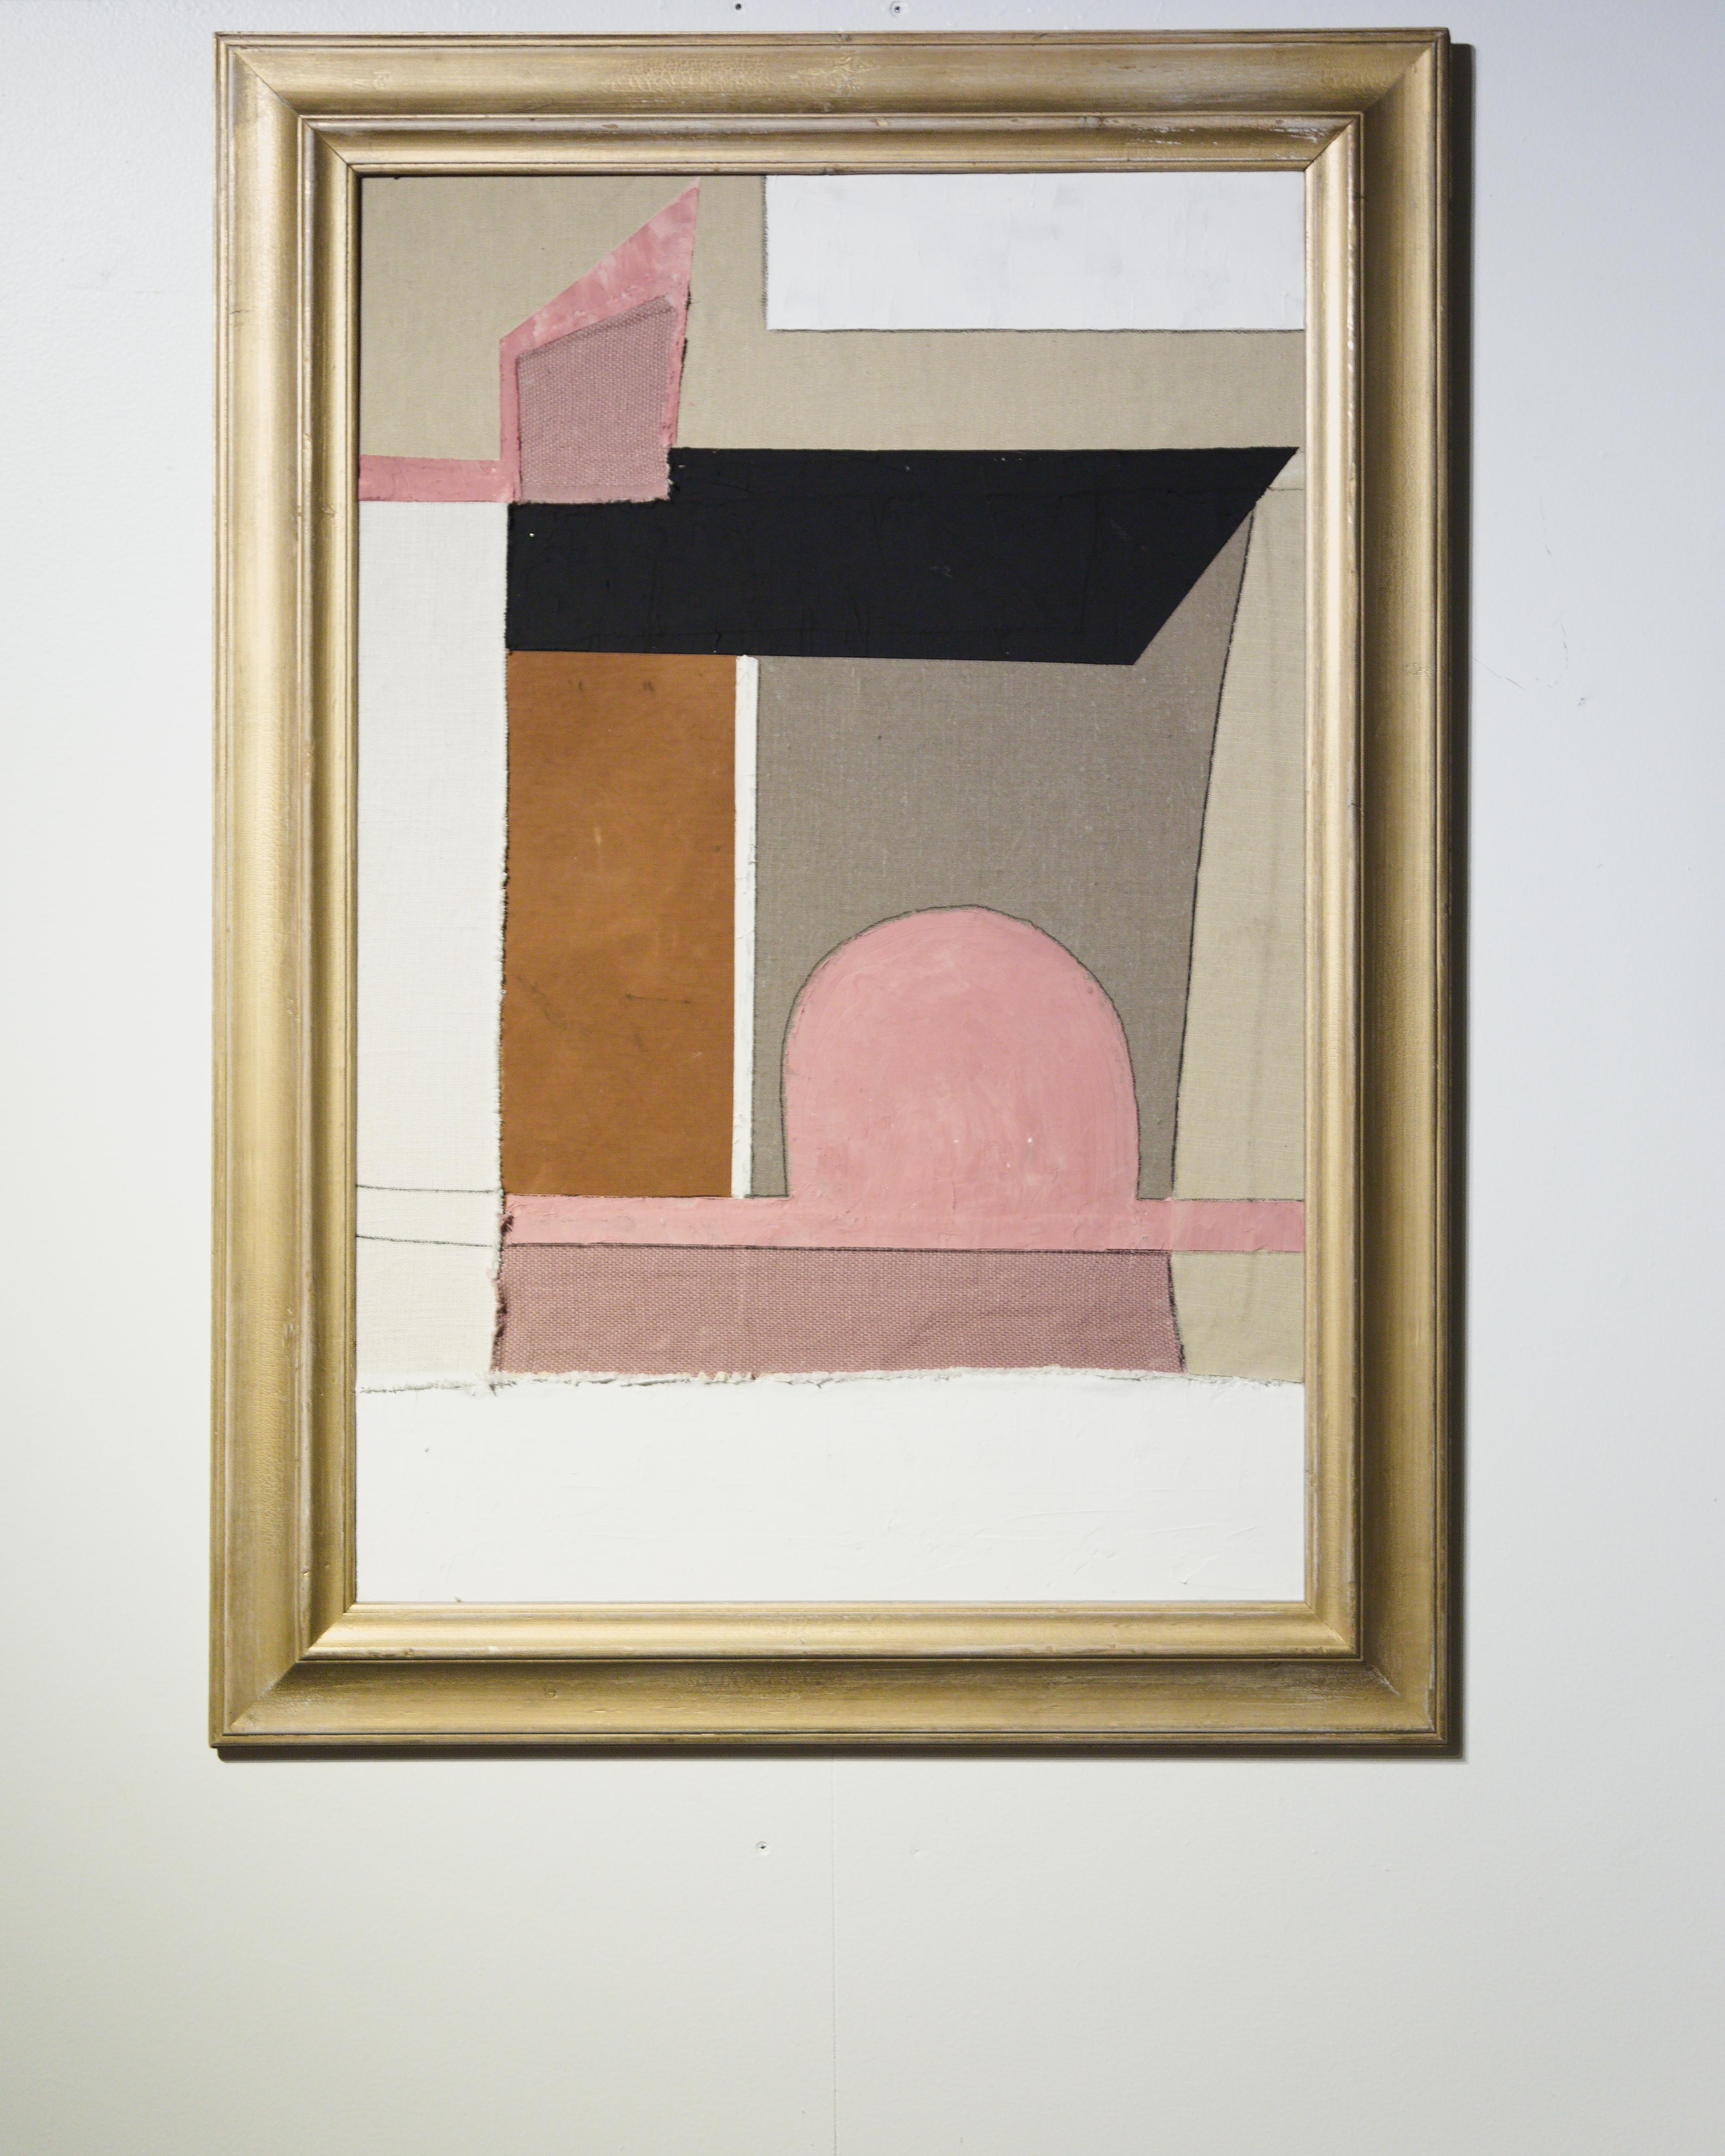 A framed textile collage by artist Raoul Morren, made in 2023. This dynamic composition combines graphic shapes in colorful tones and textures. Earthy greens and sandy beiges are energized with gestural outlines and clean geometries invigorated with